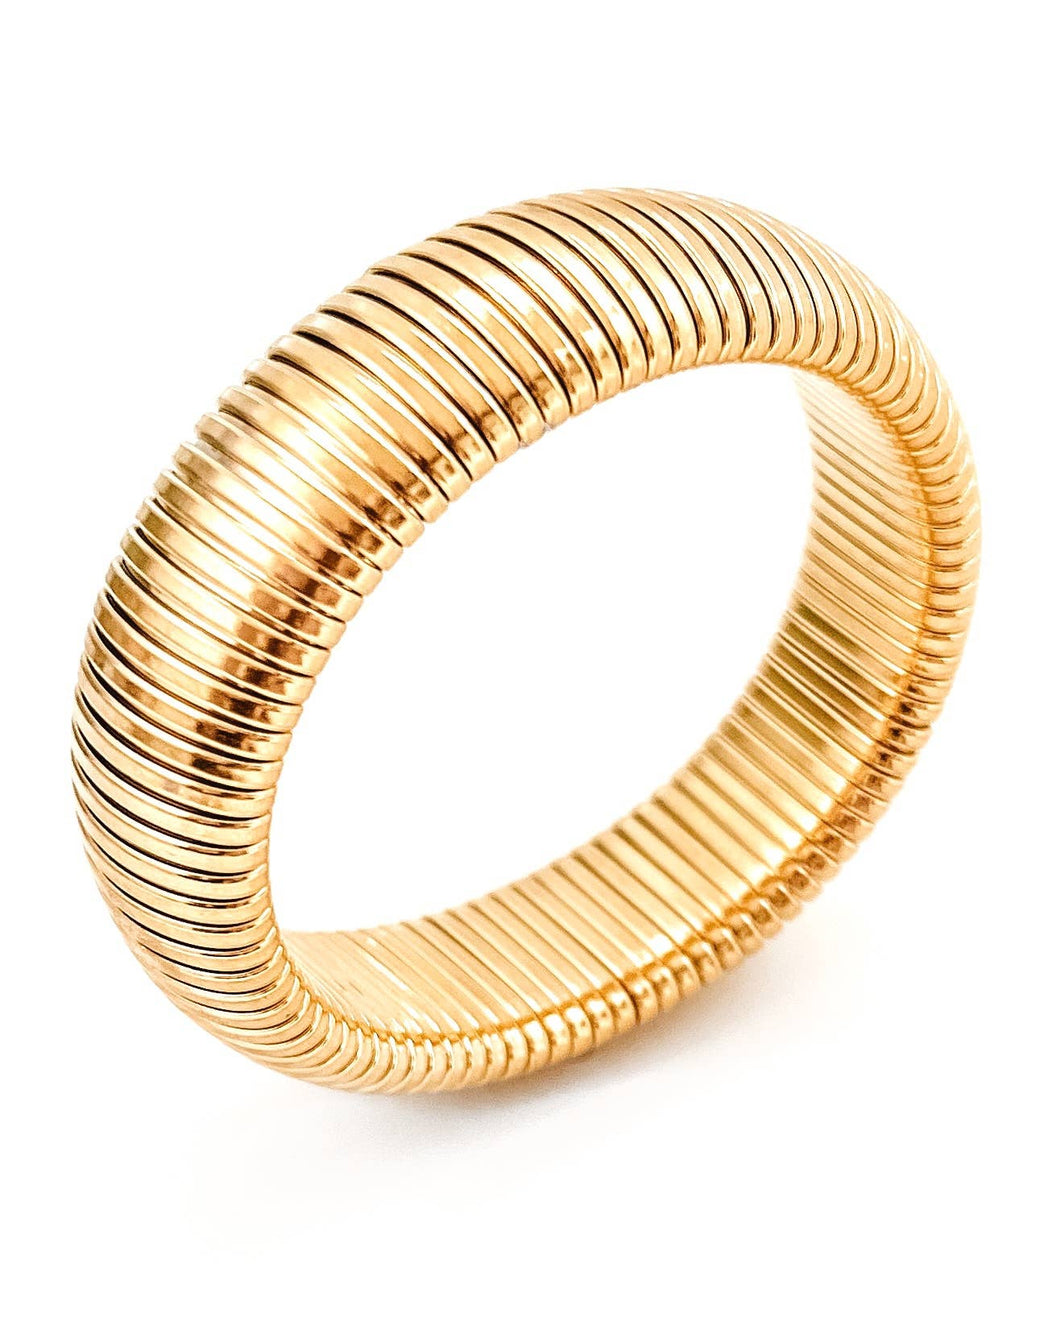 Baia Thick Coil Bangle Bracelet in GOLD